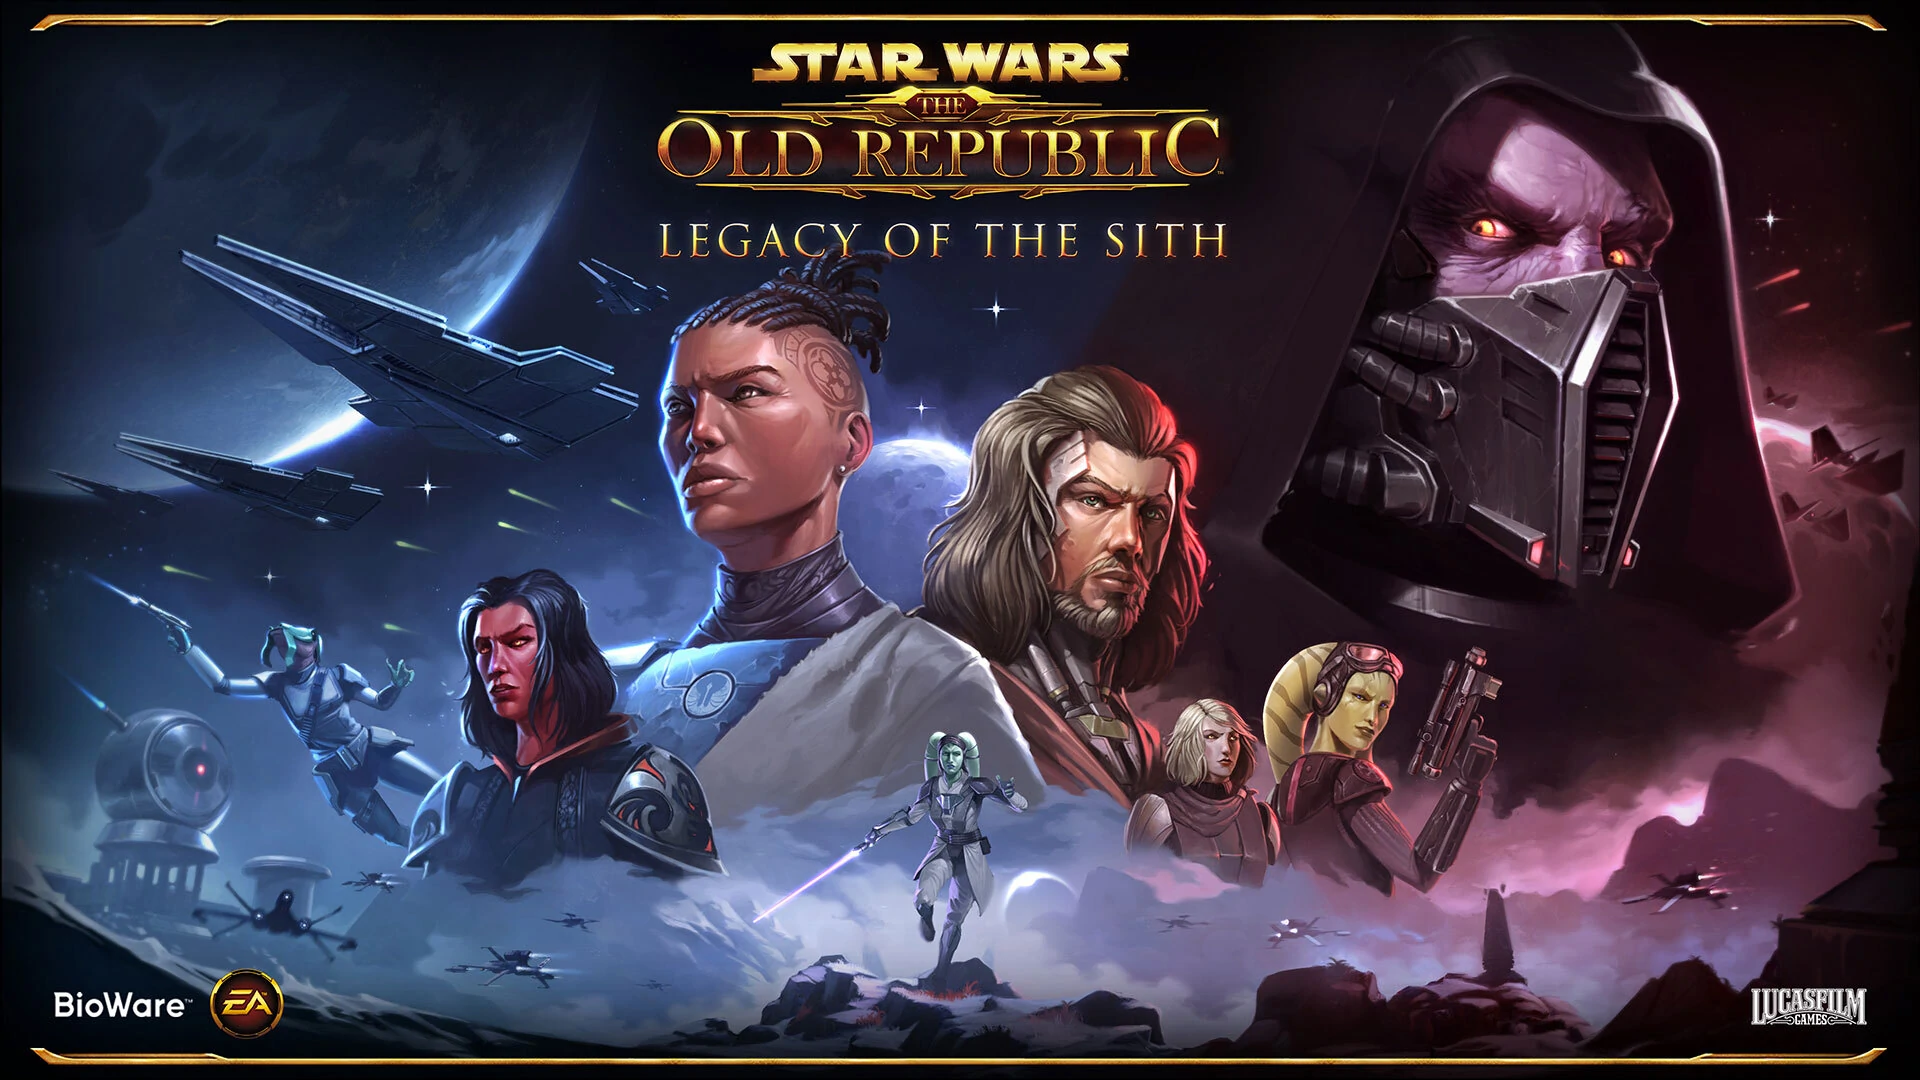 Star Wars: The Old Republic’s Legacy of the Sith Expansion Goes Live